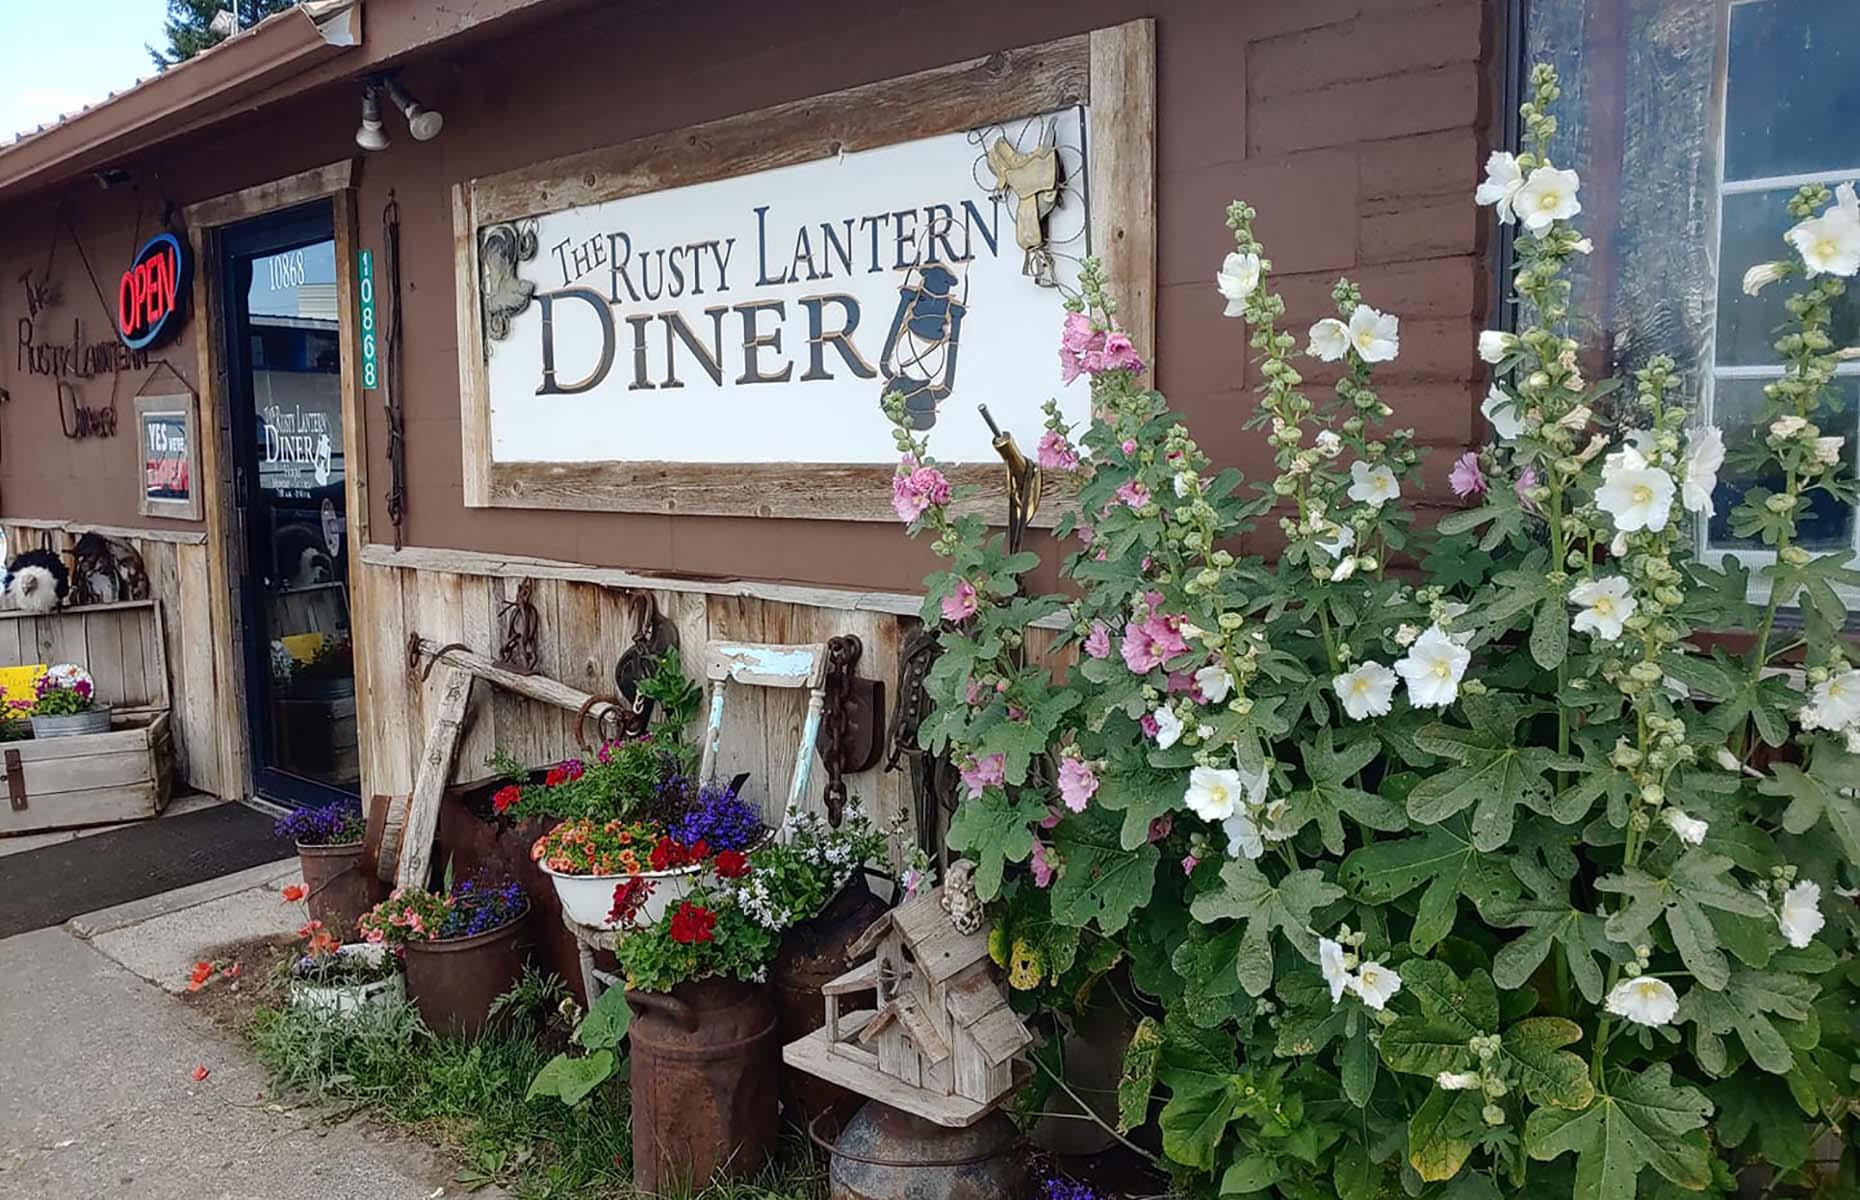 <p>If you’re passing through Ucon on your <a href="https://therustylanterndiner.com/about/">way to Yellowstone,</a> The Rusty Lantern is a cozy spot to stop. Made of wood and surrounded by pots and flowers, it doesn’t look like a traditional diner. But it <a href="https://www.yelp.com/biz/rusty-lantern-diner-idaho-falls?sort_by=date_desc">serves great</a> breakfast skillets featuring hash browns, bacon, cheese, cooked onions and scrambled eggs, prime rib on Friday and Saturday, and ginormous, sticky cinnamon rolls.</p>